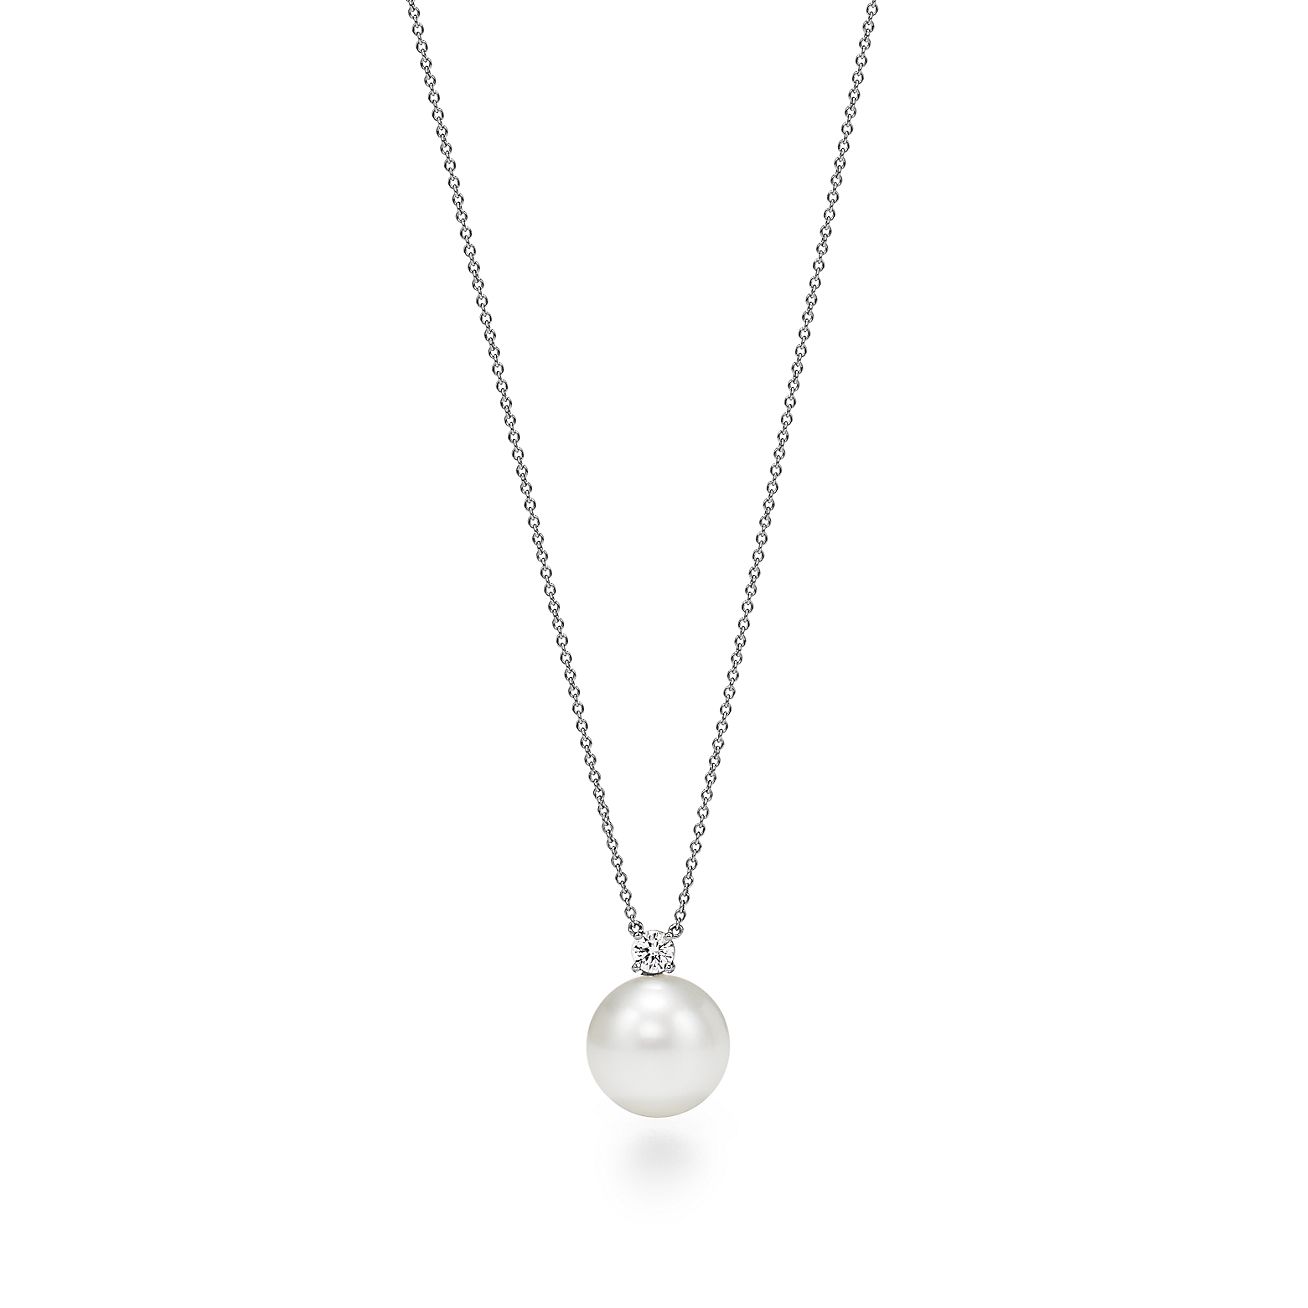 KOMEHYO|TIFFANY OLIVE LEAF PEARL NECKLACE|TIFFANY|BRAND JEWELRY|NECKLACE|OTHER|【OFFICIAL】  KOMEHYO, one of Japan's largest reuse department stores